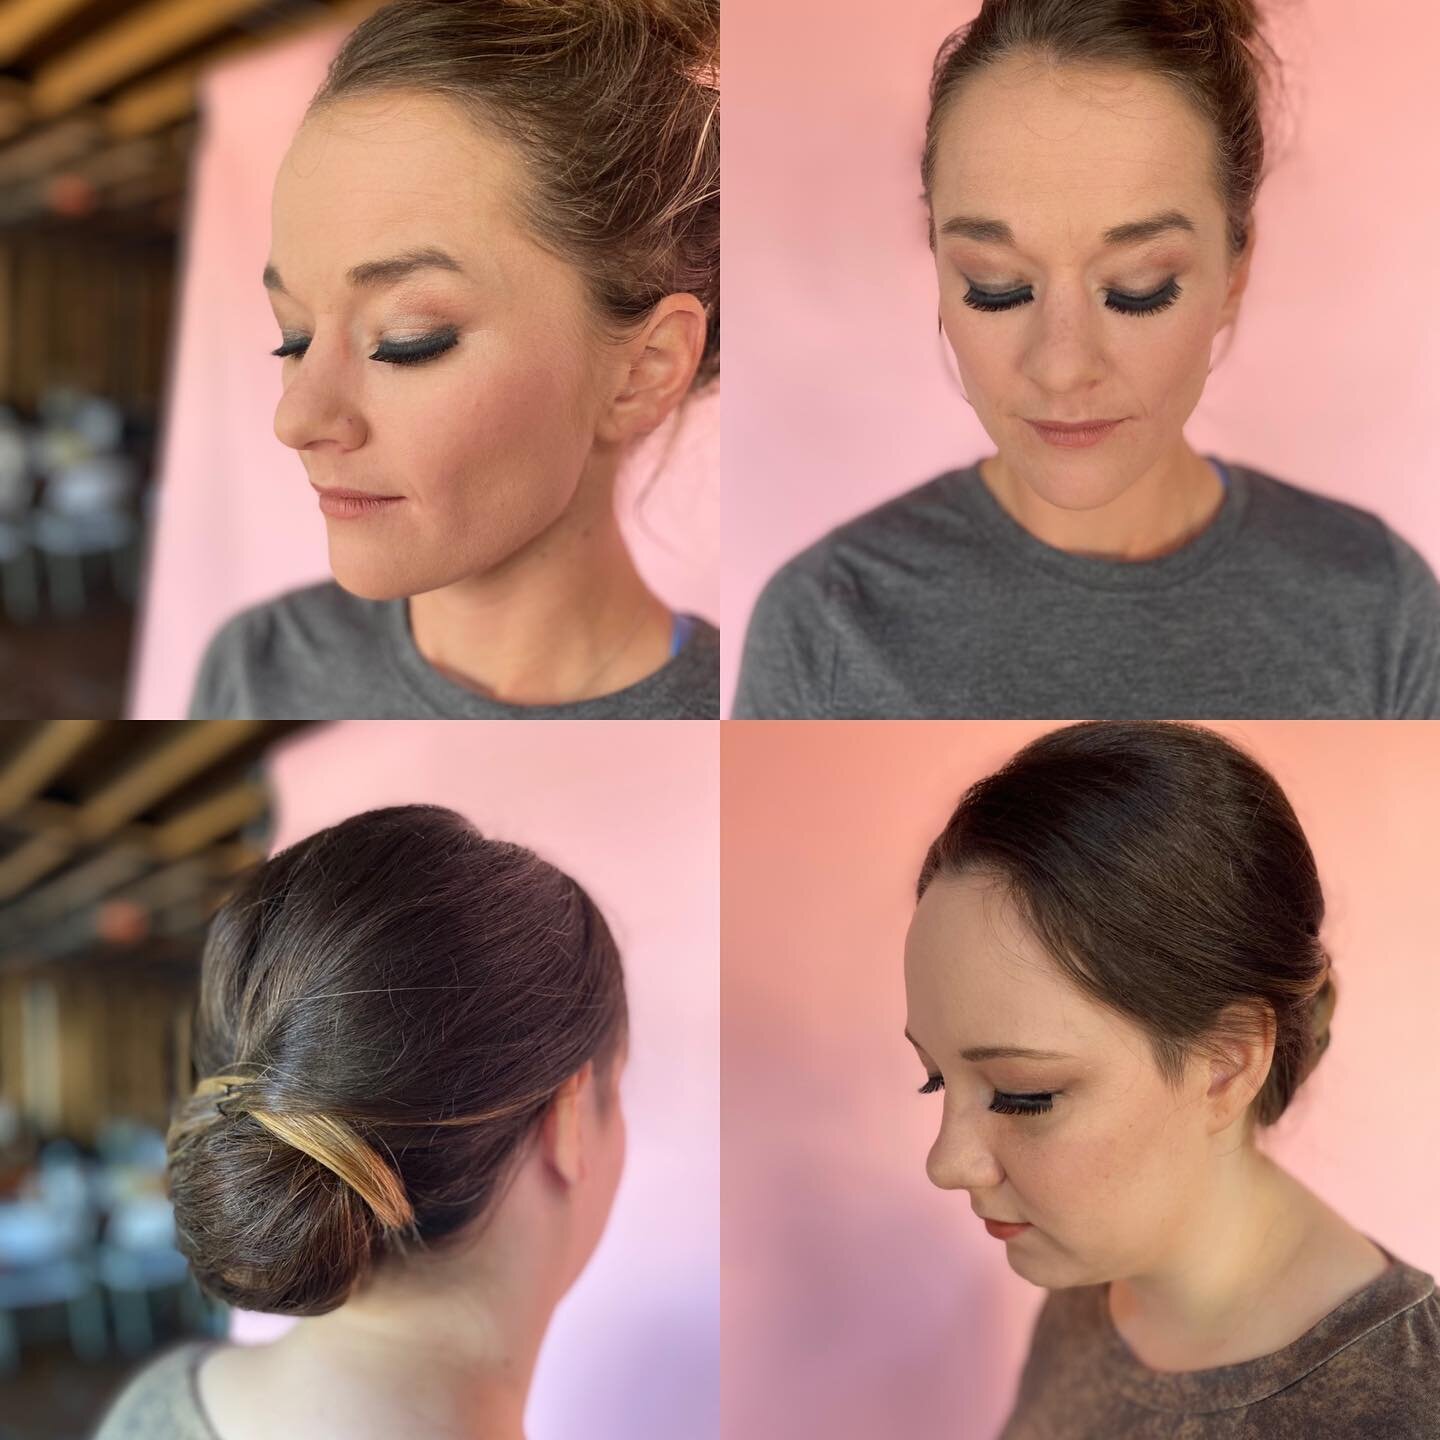 Special occasion makeup and updos by @styledbysilvija @theboulevardhaircompany #weddingmakeup #specialoccasionmakeup #specialoccasionhair #stlbridalmakeup #stlupdo